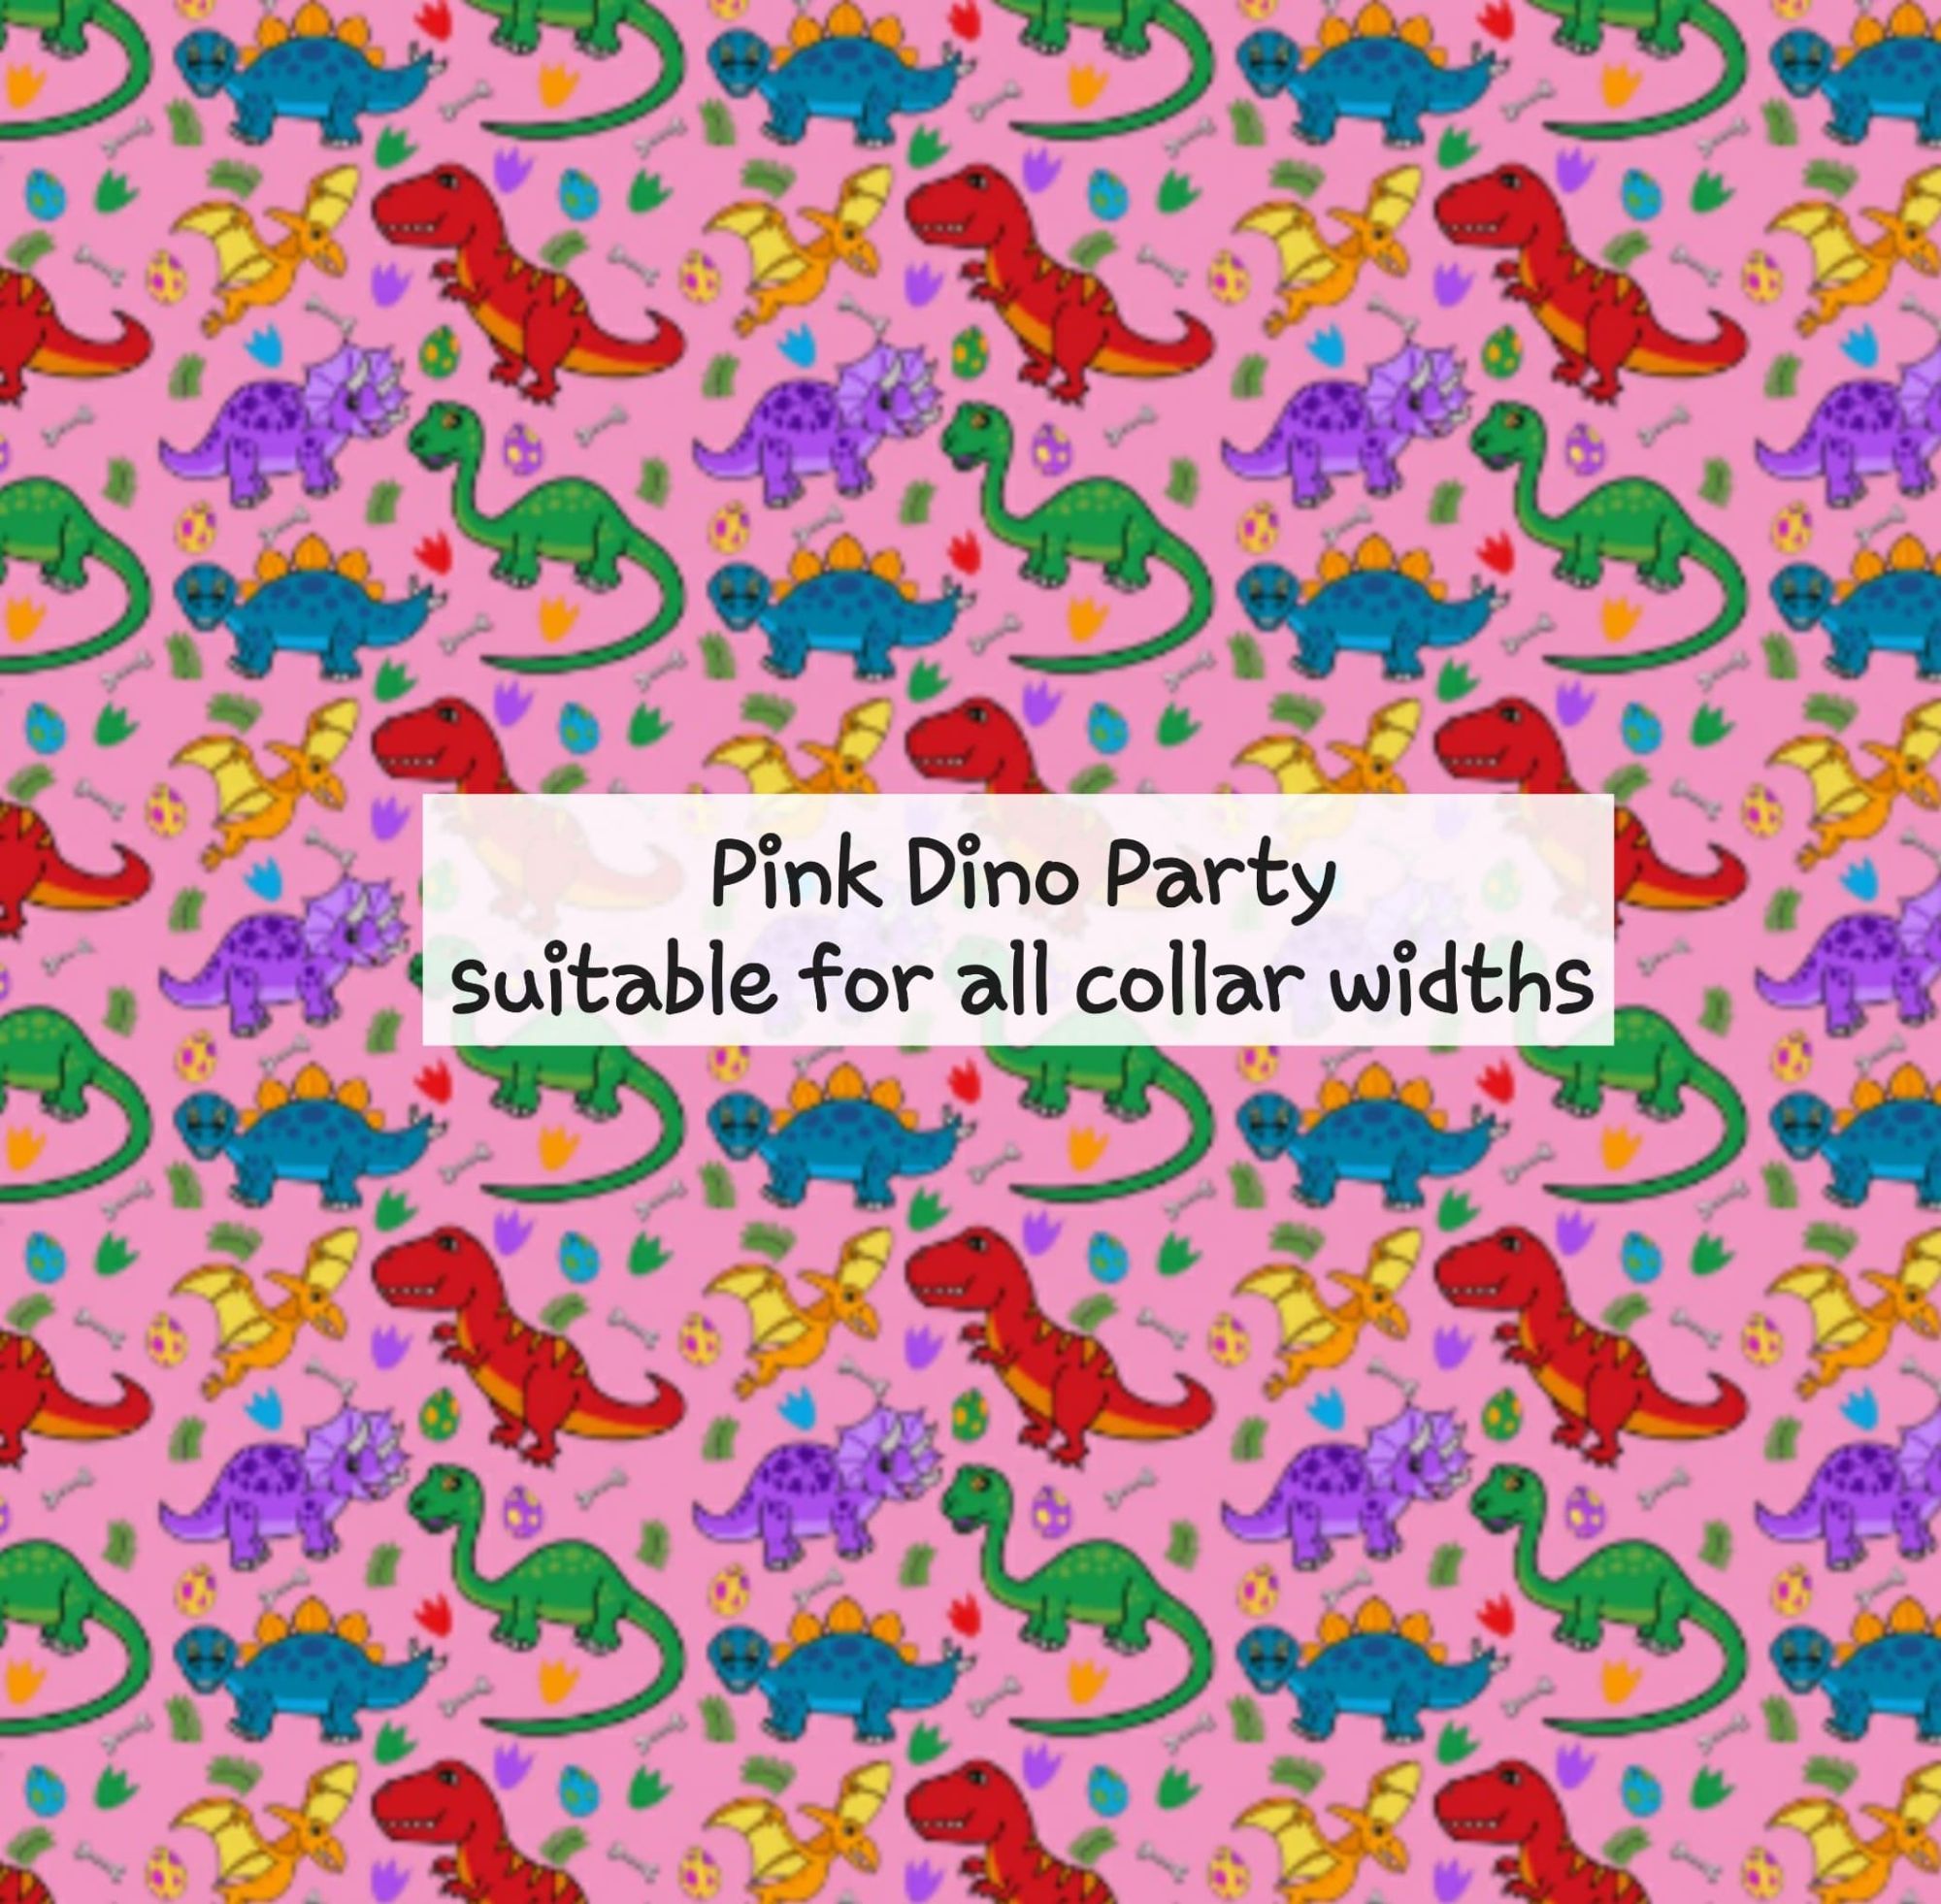 Pink Dino Party